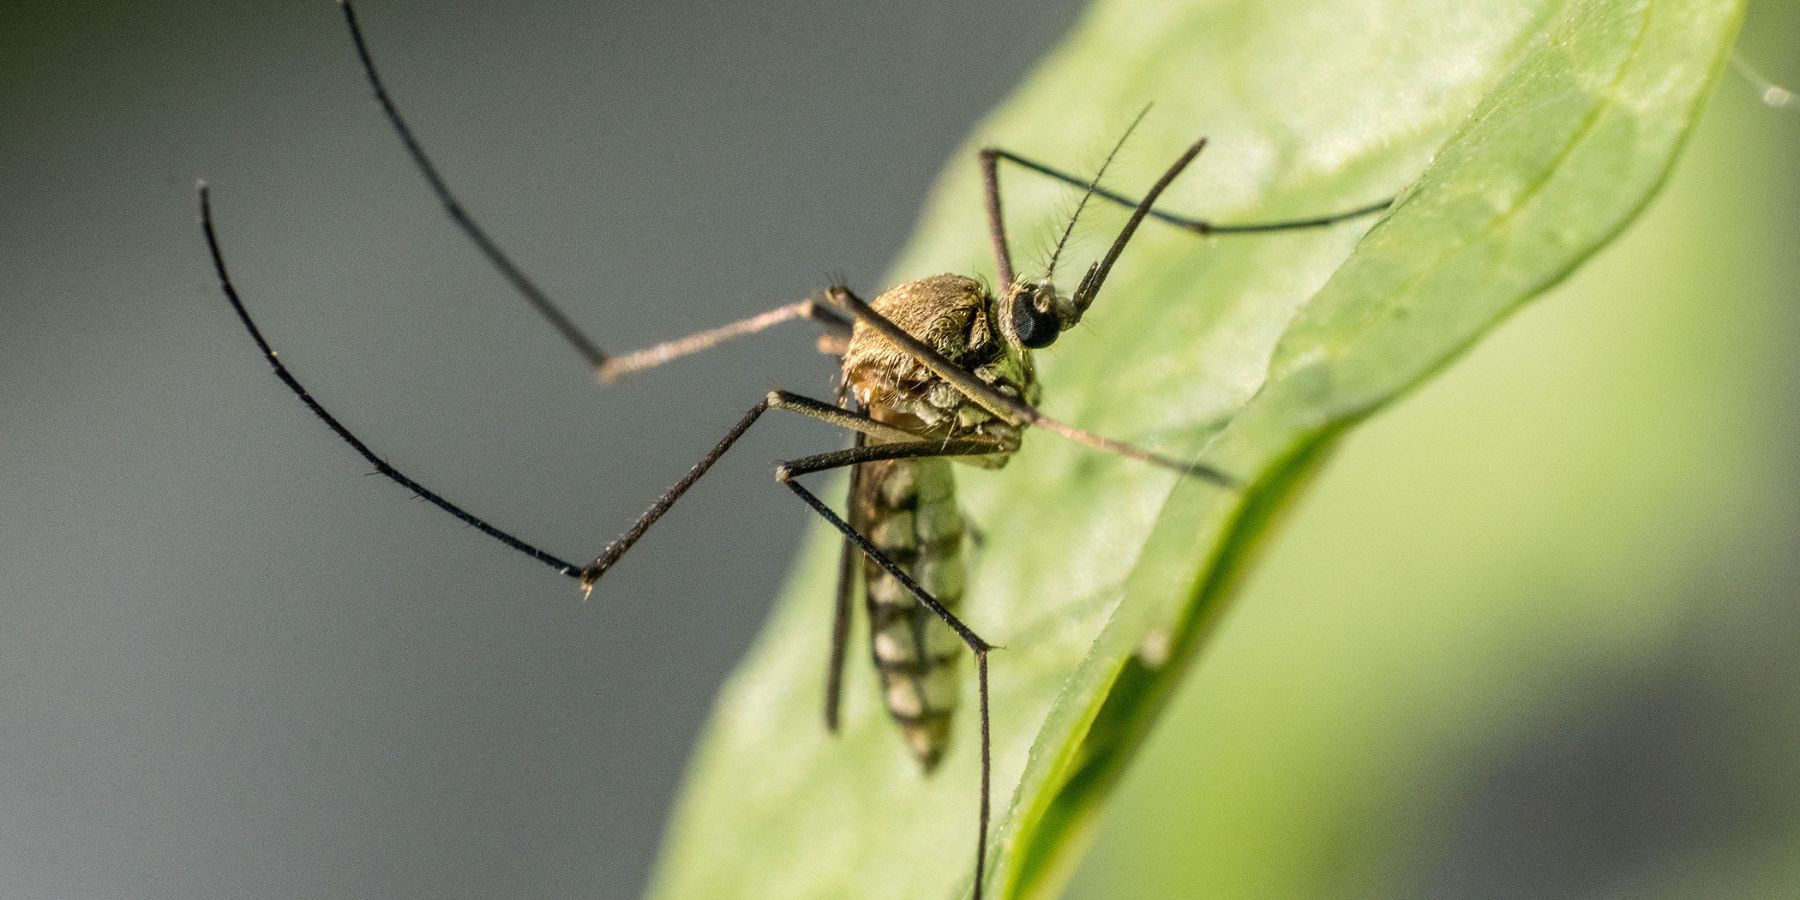 Mosquitoes' Daily Patterns: Best Times to Avoid Them